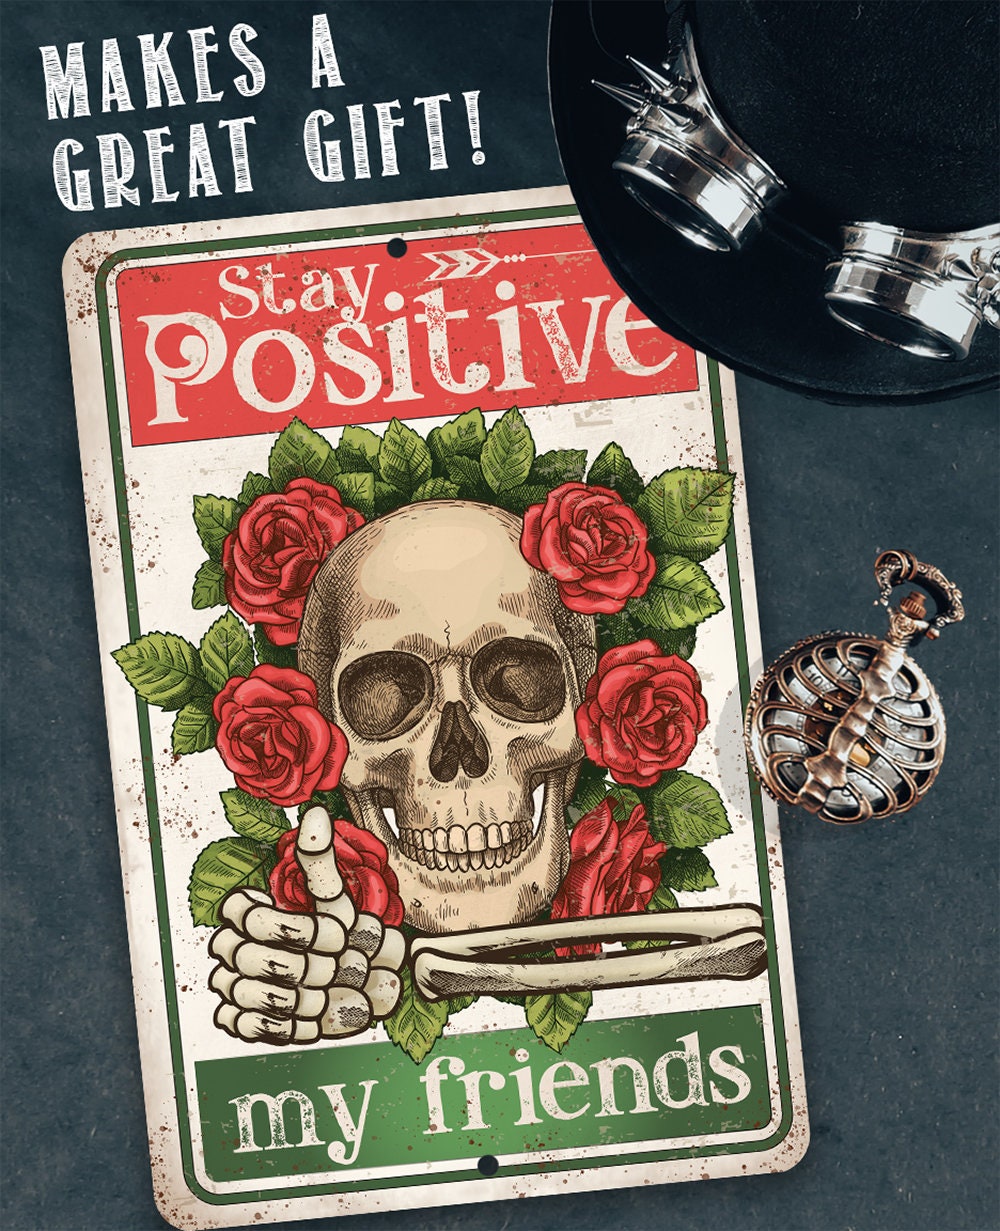 Stay Positive My Friends 8" x 12" or 12" x 18" Aluminum Tin Awesome Metal Poster Lone Star Art 